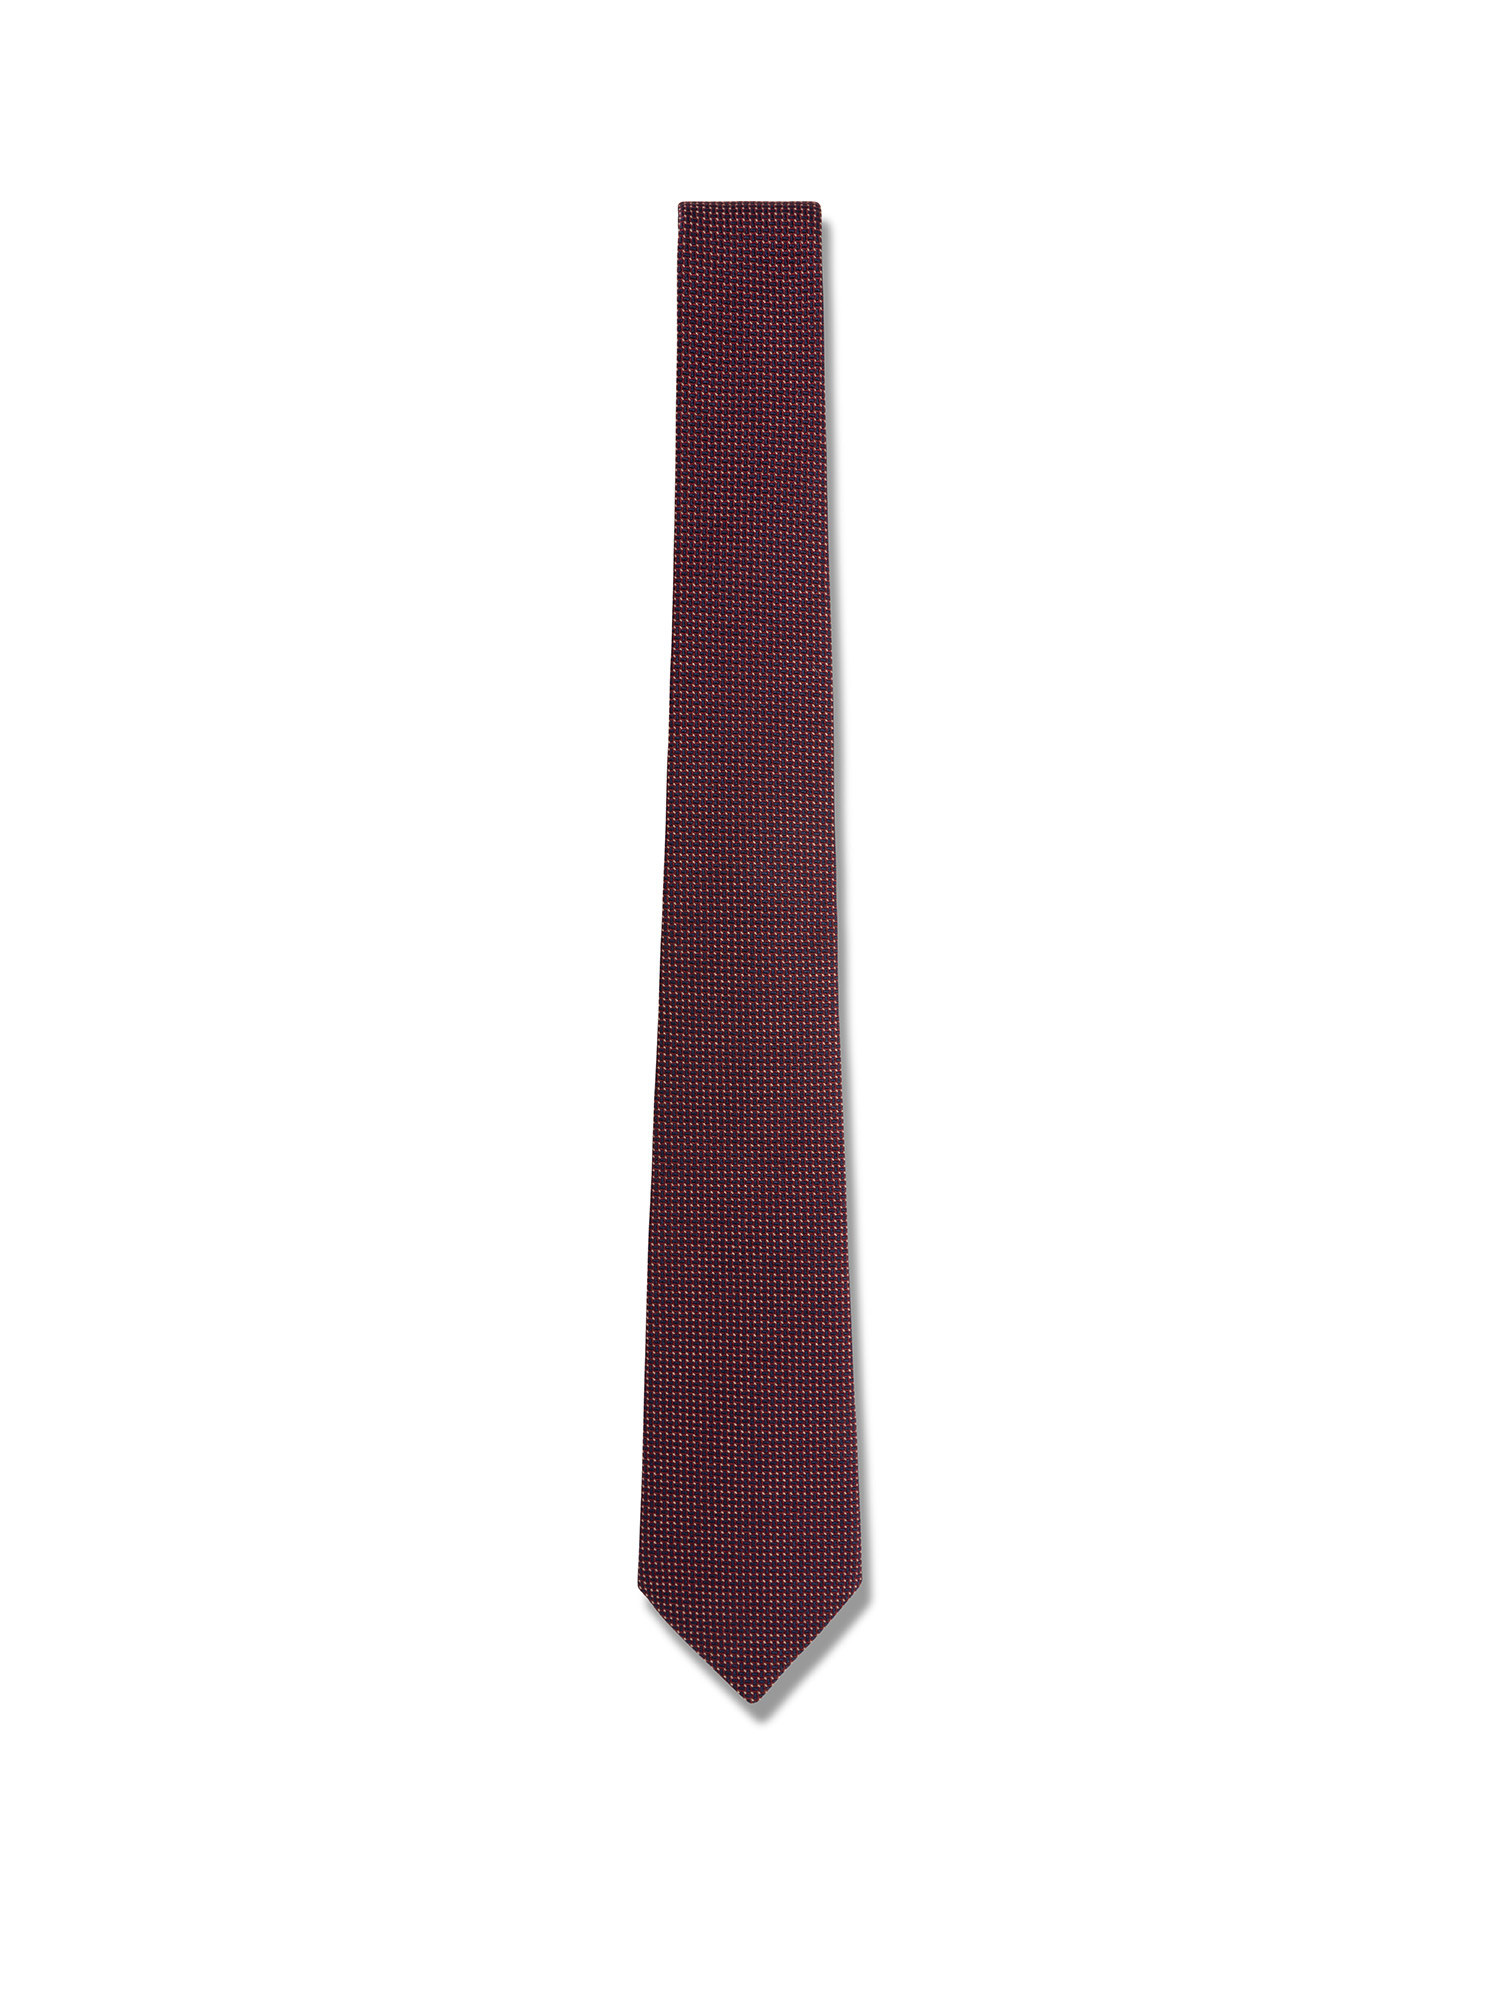 Luca D'Altieri - Patterned silk and cotton tie, Red Bordeaux, large image number 1